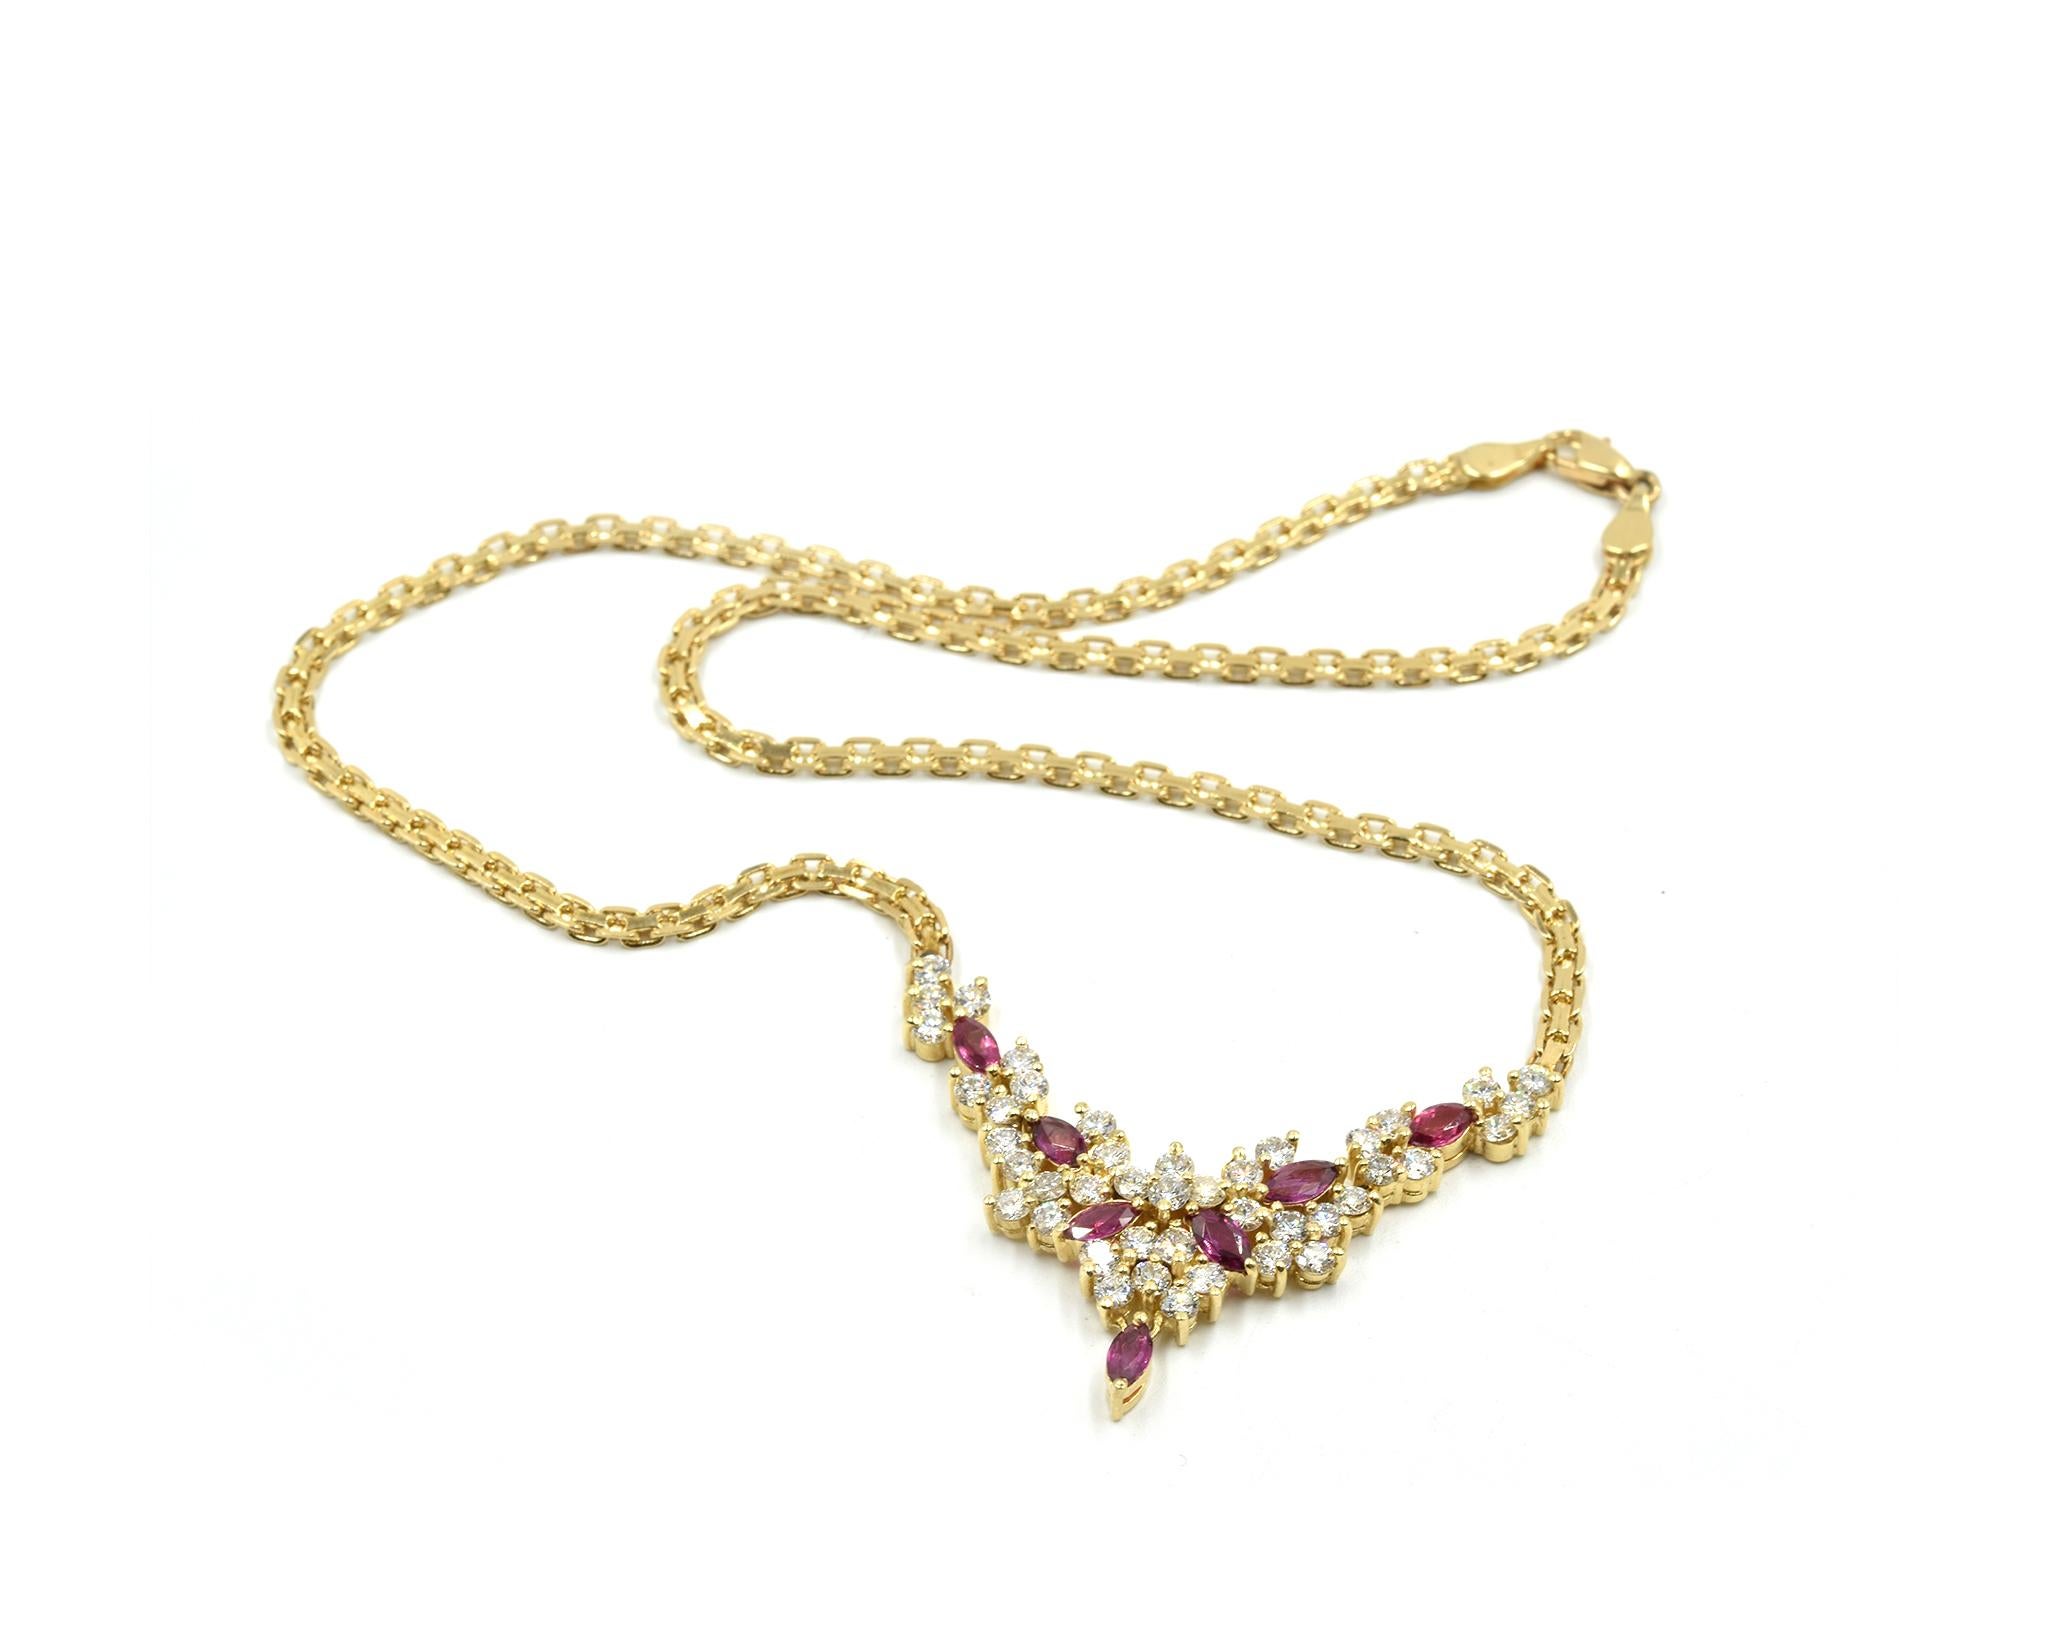 Designer: custom design
Material: 14k yellow gold
Diamonds: 42 round brilliant cut diamonds = 2.82 carat total weight
Rubies: seven marquise cut rubies
Dimensions: necklace is 17-inches long
Weight: 18.91 grams

